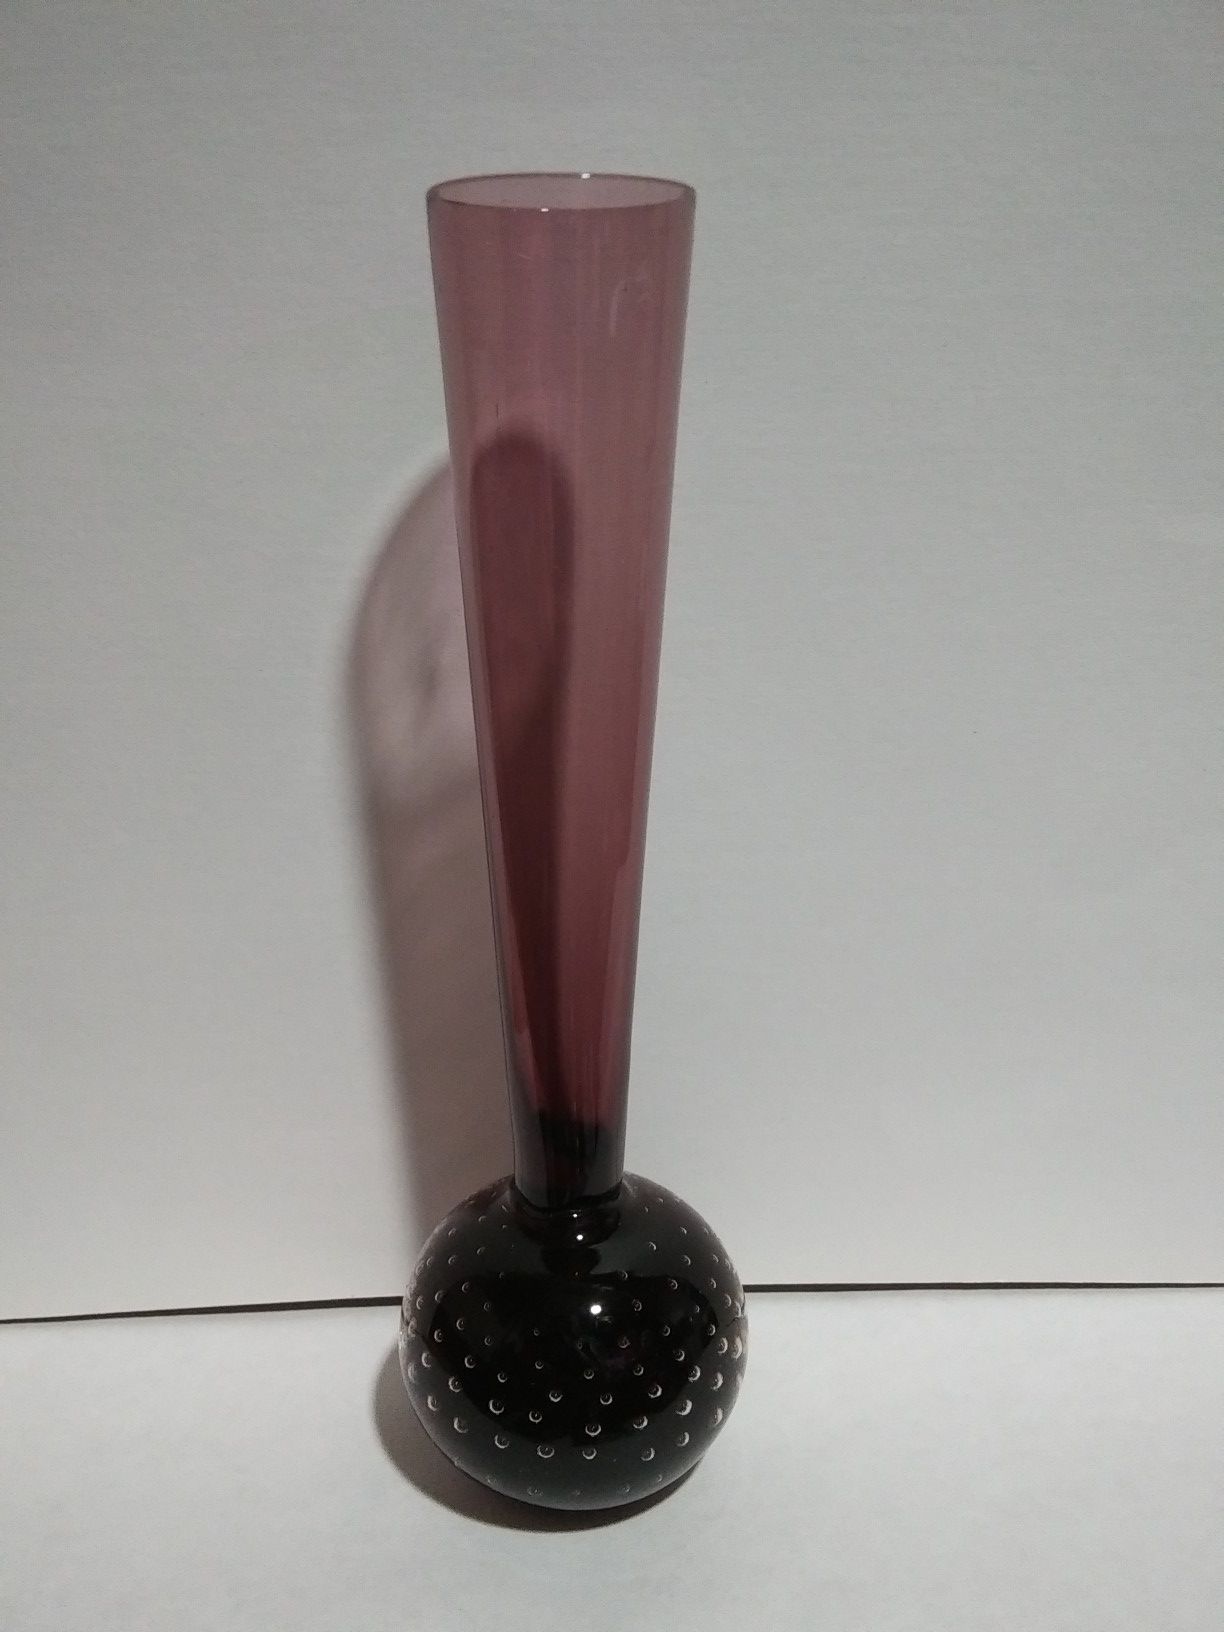 Two Kosta Sweden Controlled Bubble Bud Vases